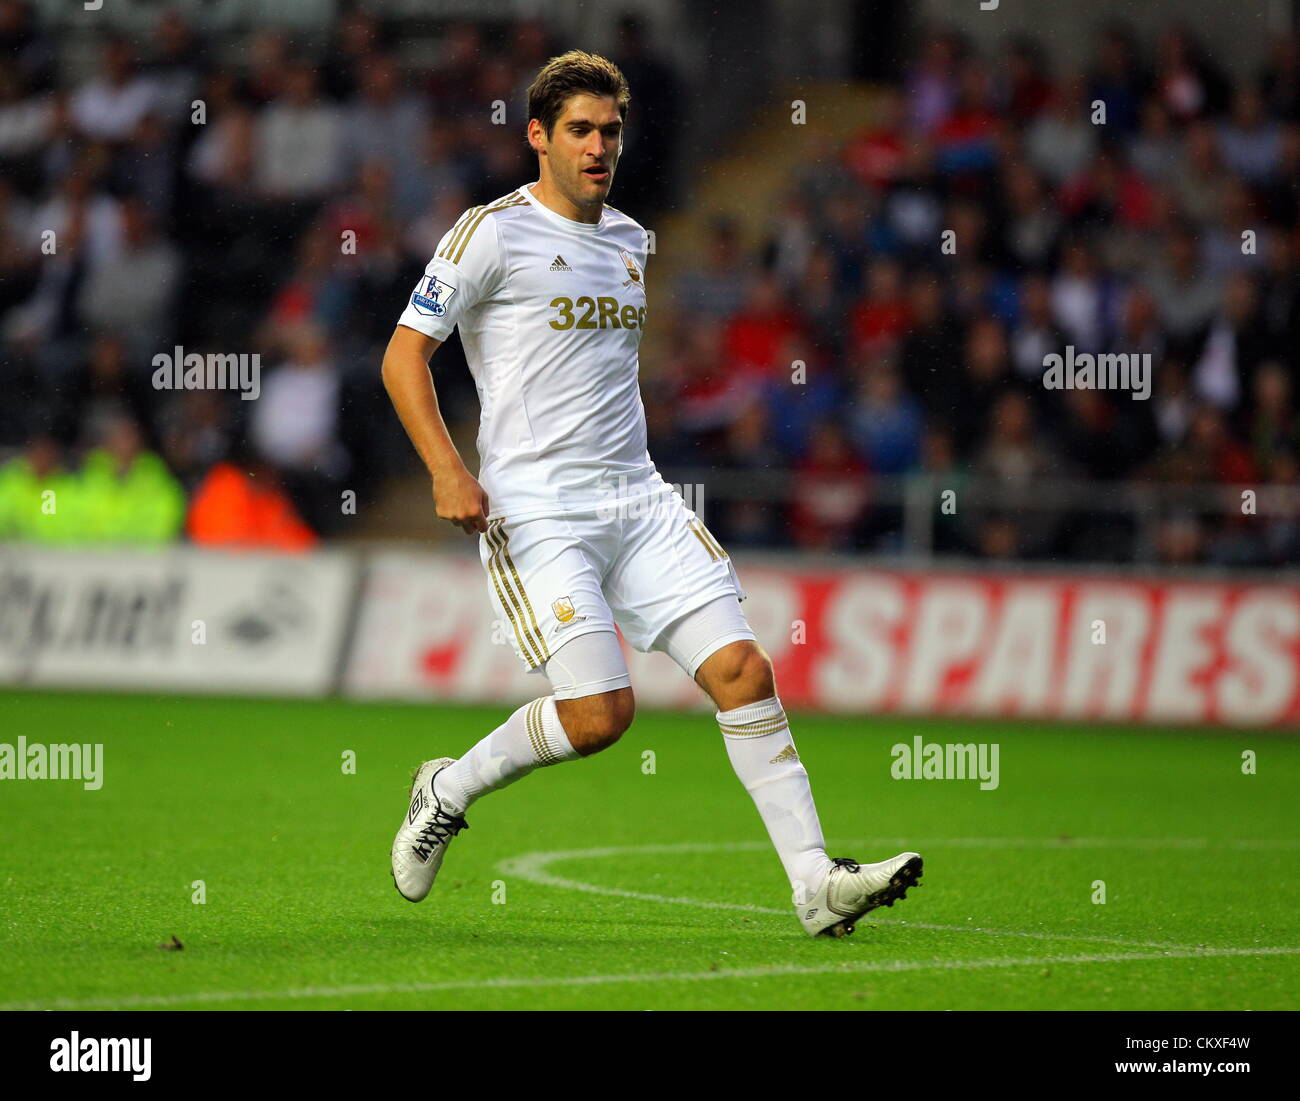 Liberty Stadium, Swansea, UK. 28th Aug 2012.   Pictured: Danny Graham of Swansea. Capital One Cup game, Swansea City FC v Barnsley at the Liberty Stadium, south Wales, UK. Credit:  D Legakis / Alamy Live News Stock Photo